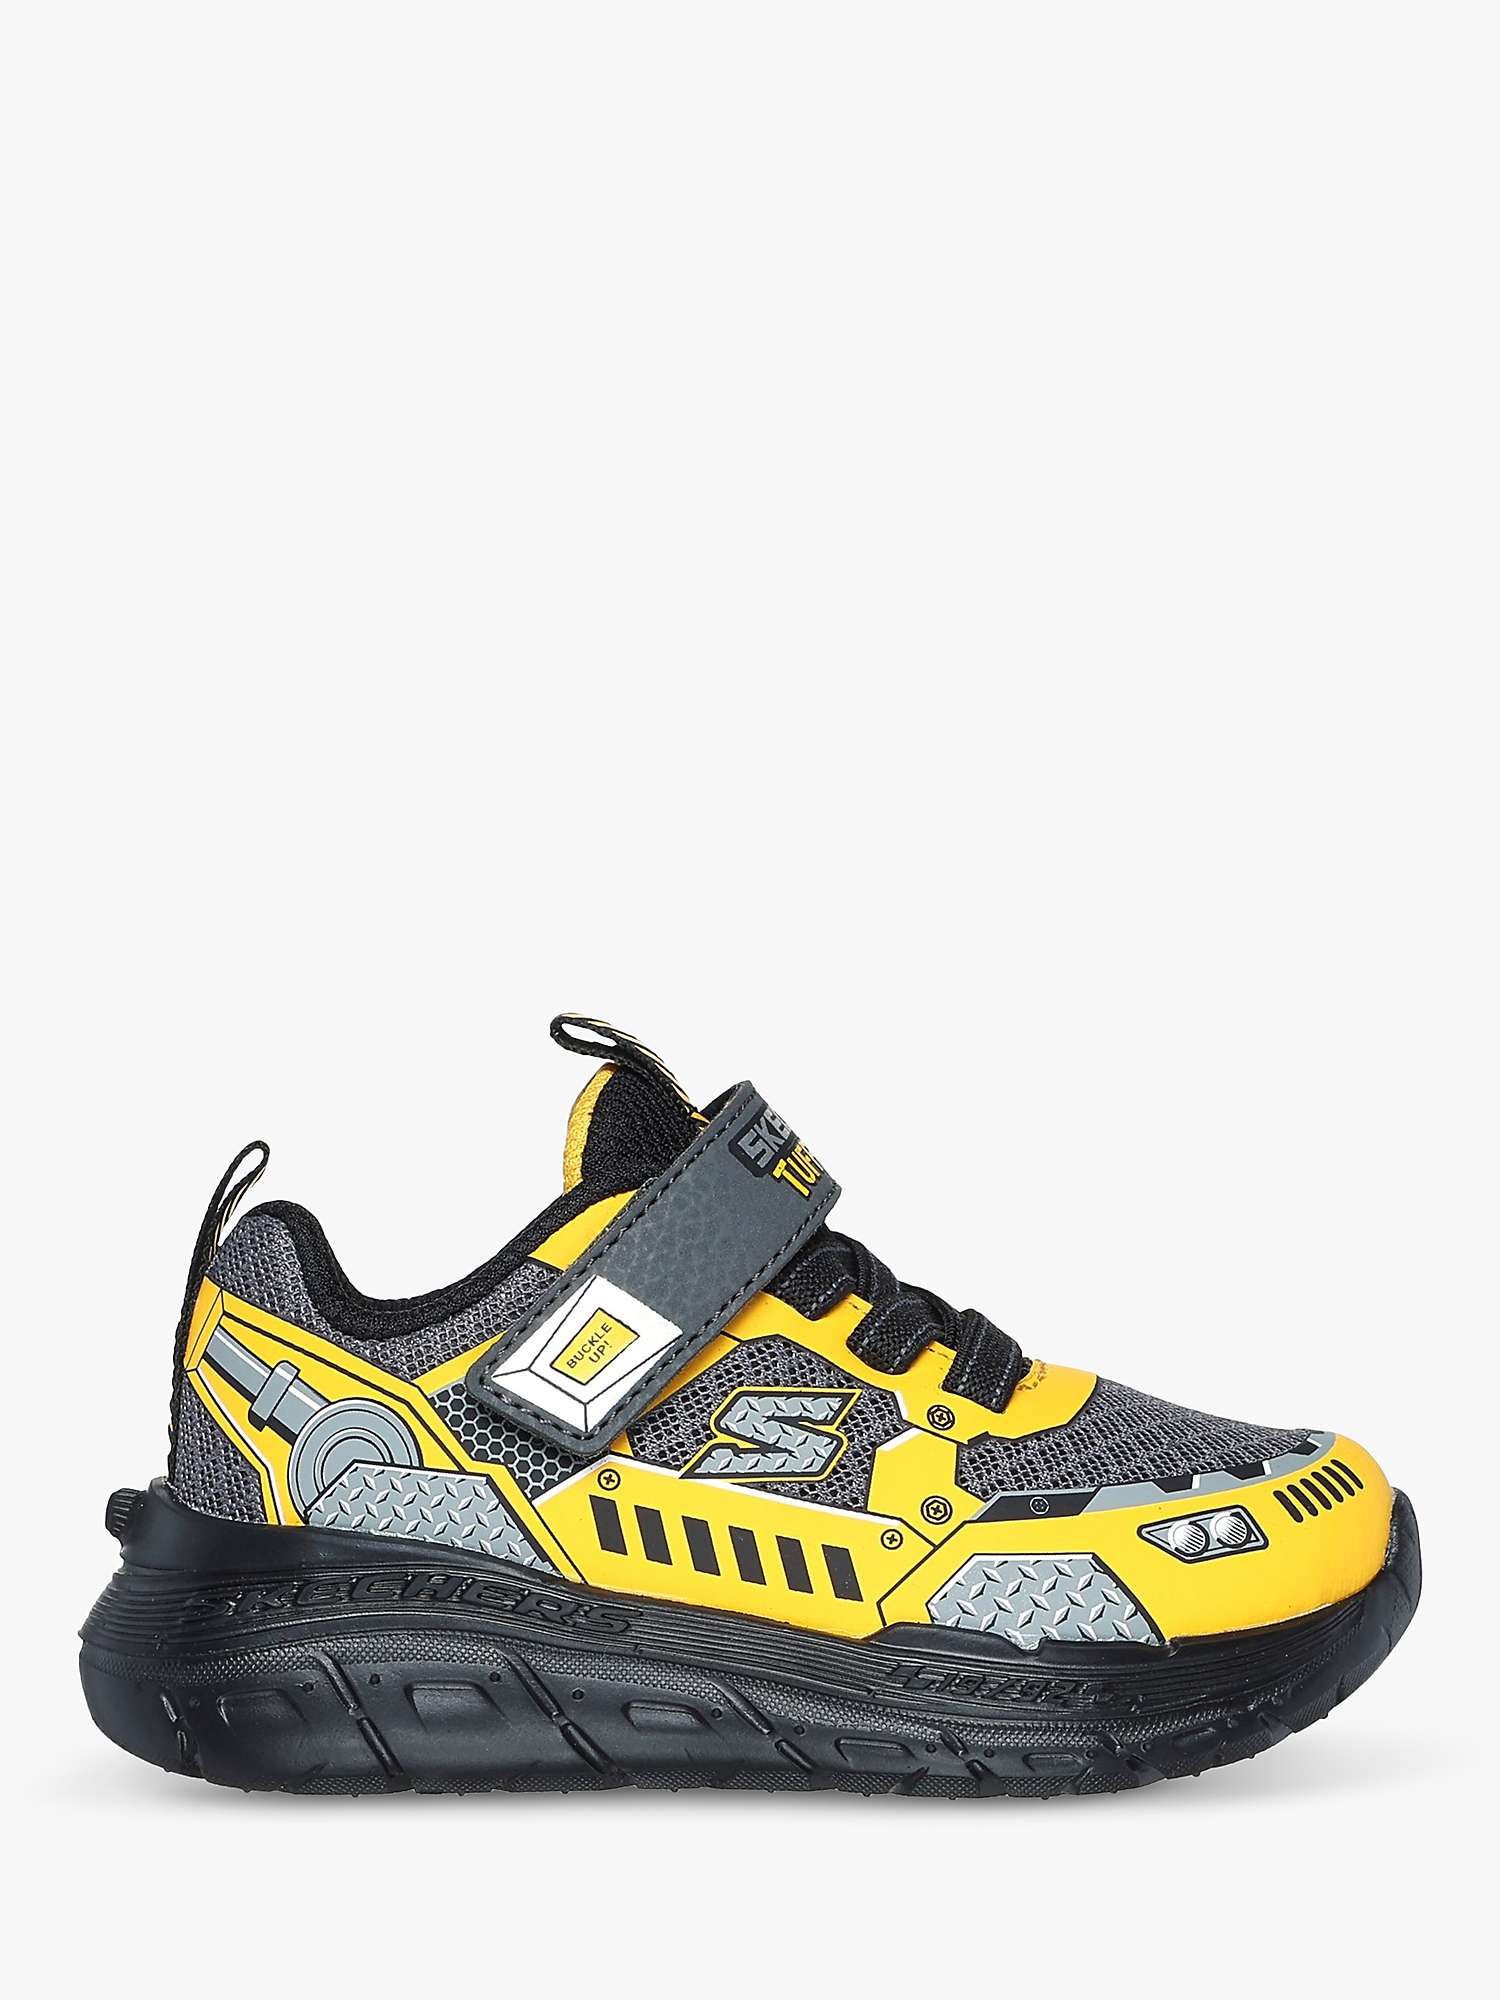 Buy Skechers Kids' Skech Tracks Trainers, Yellow/Charcoal Online at johnlewis.com